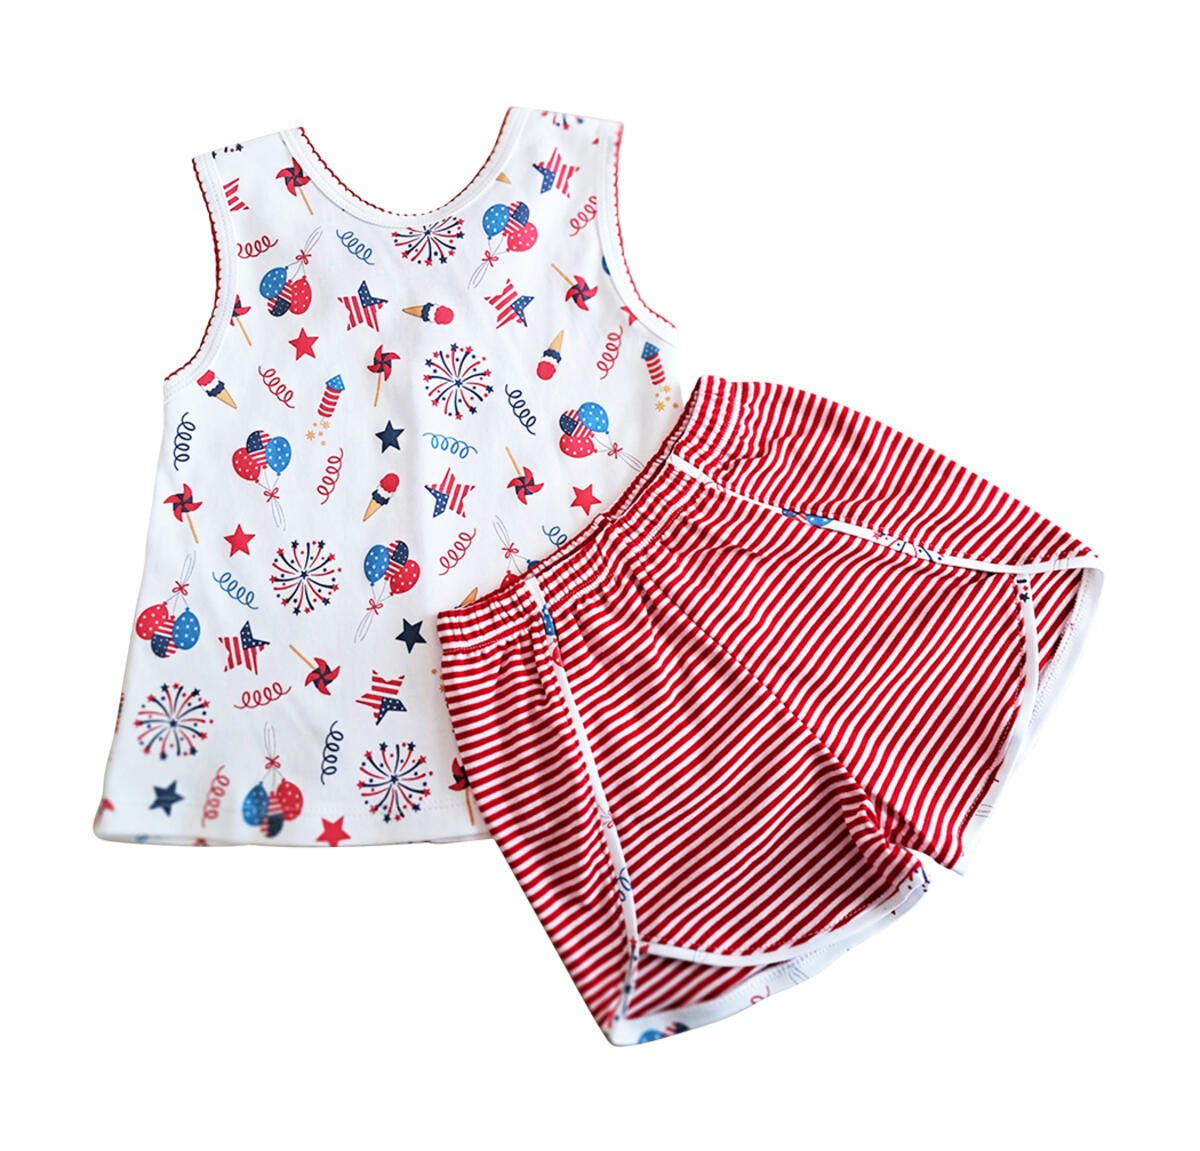 Marco & Lizzy 4th of July Print Short Set Girl's Pima Cotton IF0013S4 5104